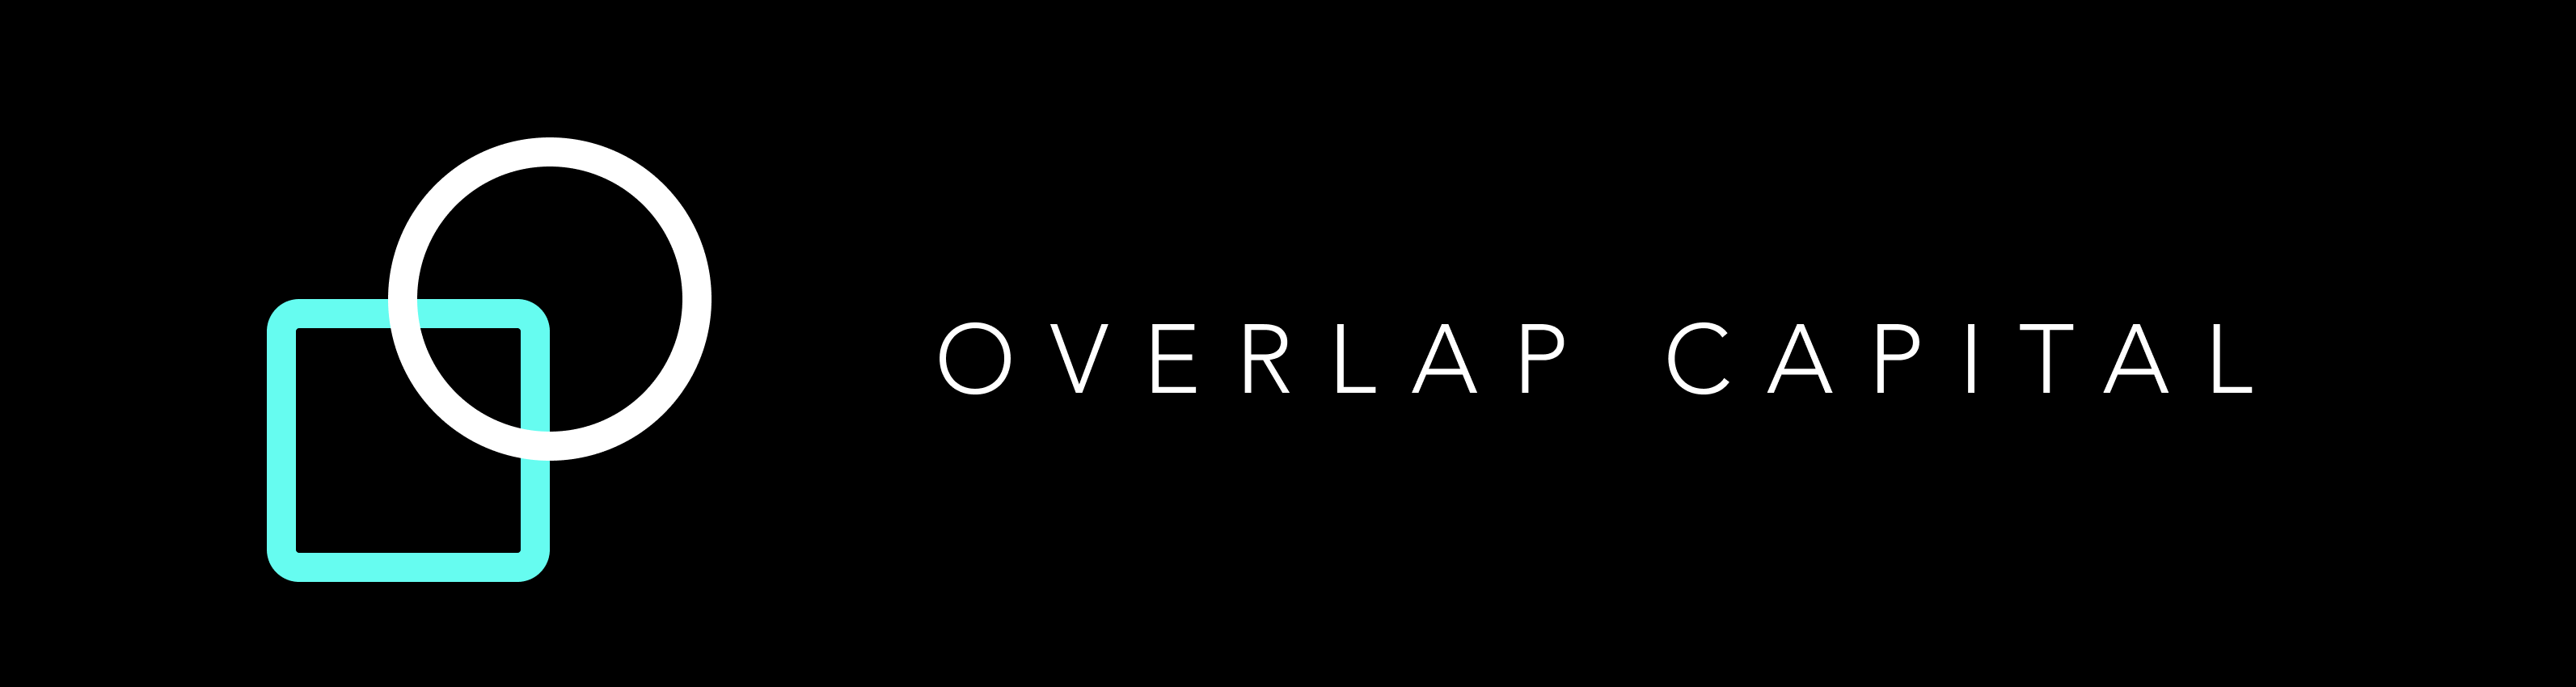 Overlap Capital - Early-stage Venture Capital